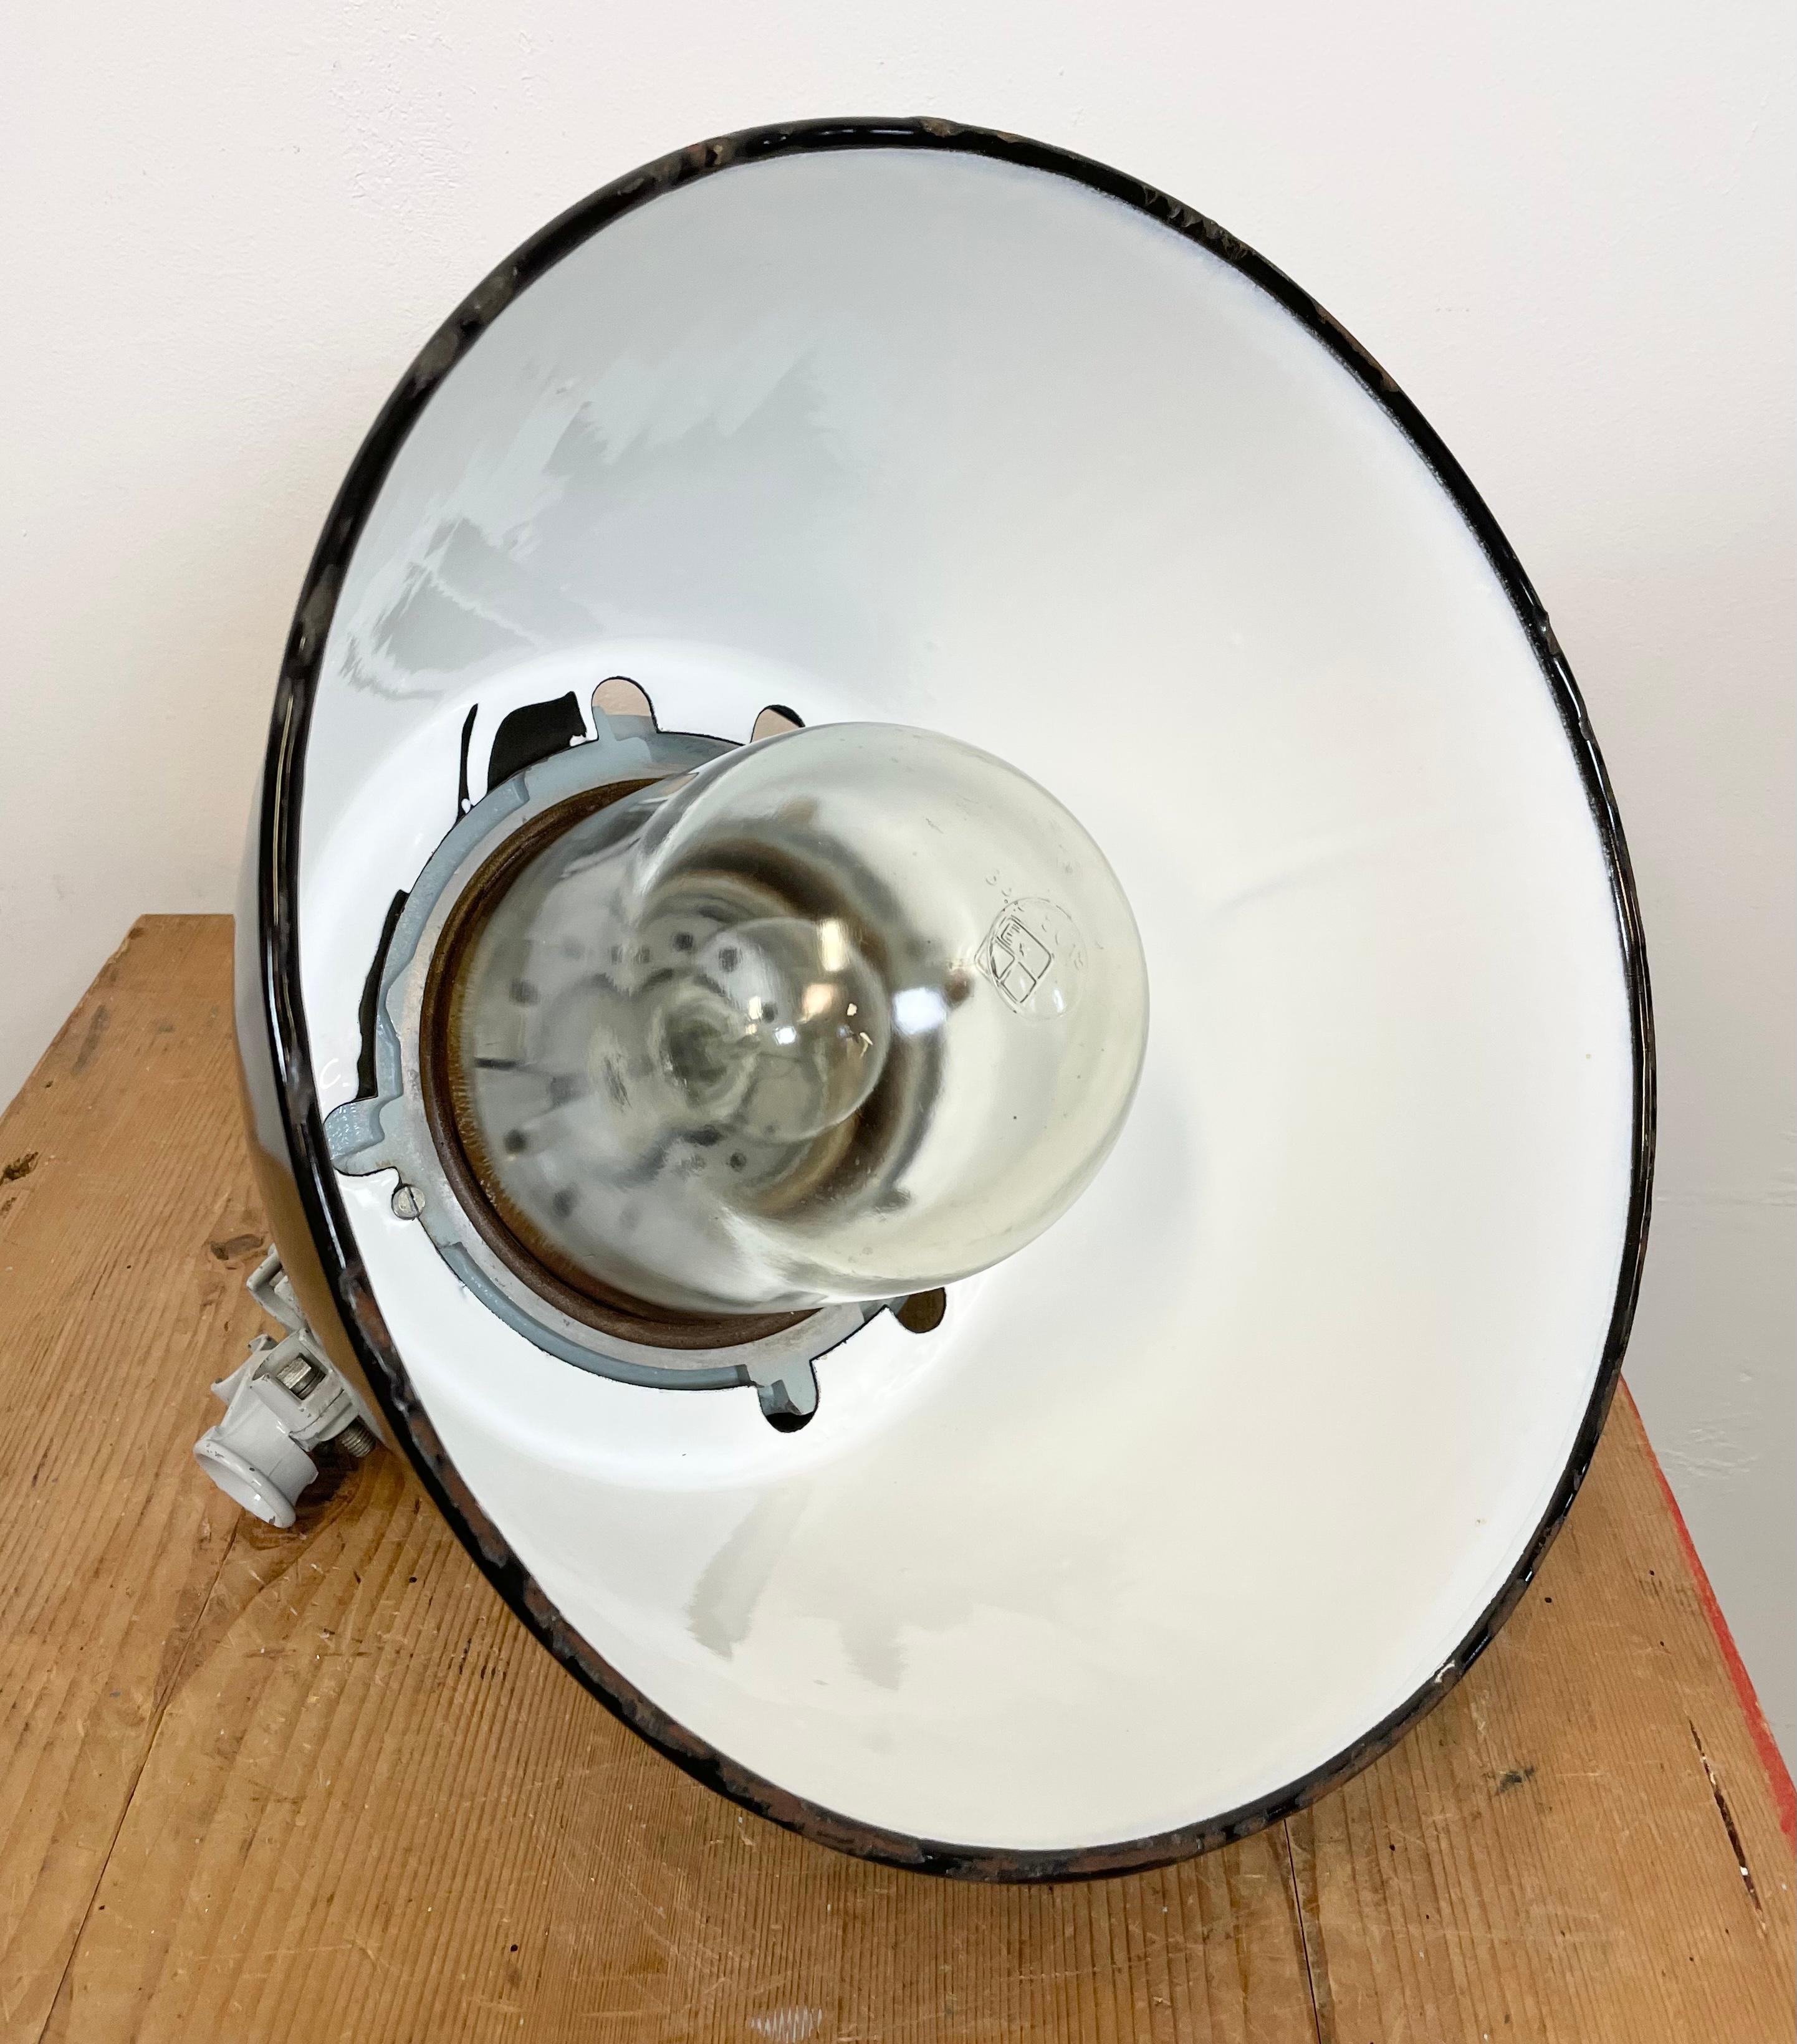 Grey Explosion Proof Lamp with Black Enameled Shade, 1970s For Sale 5